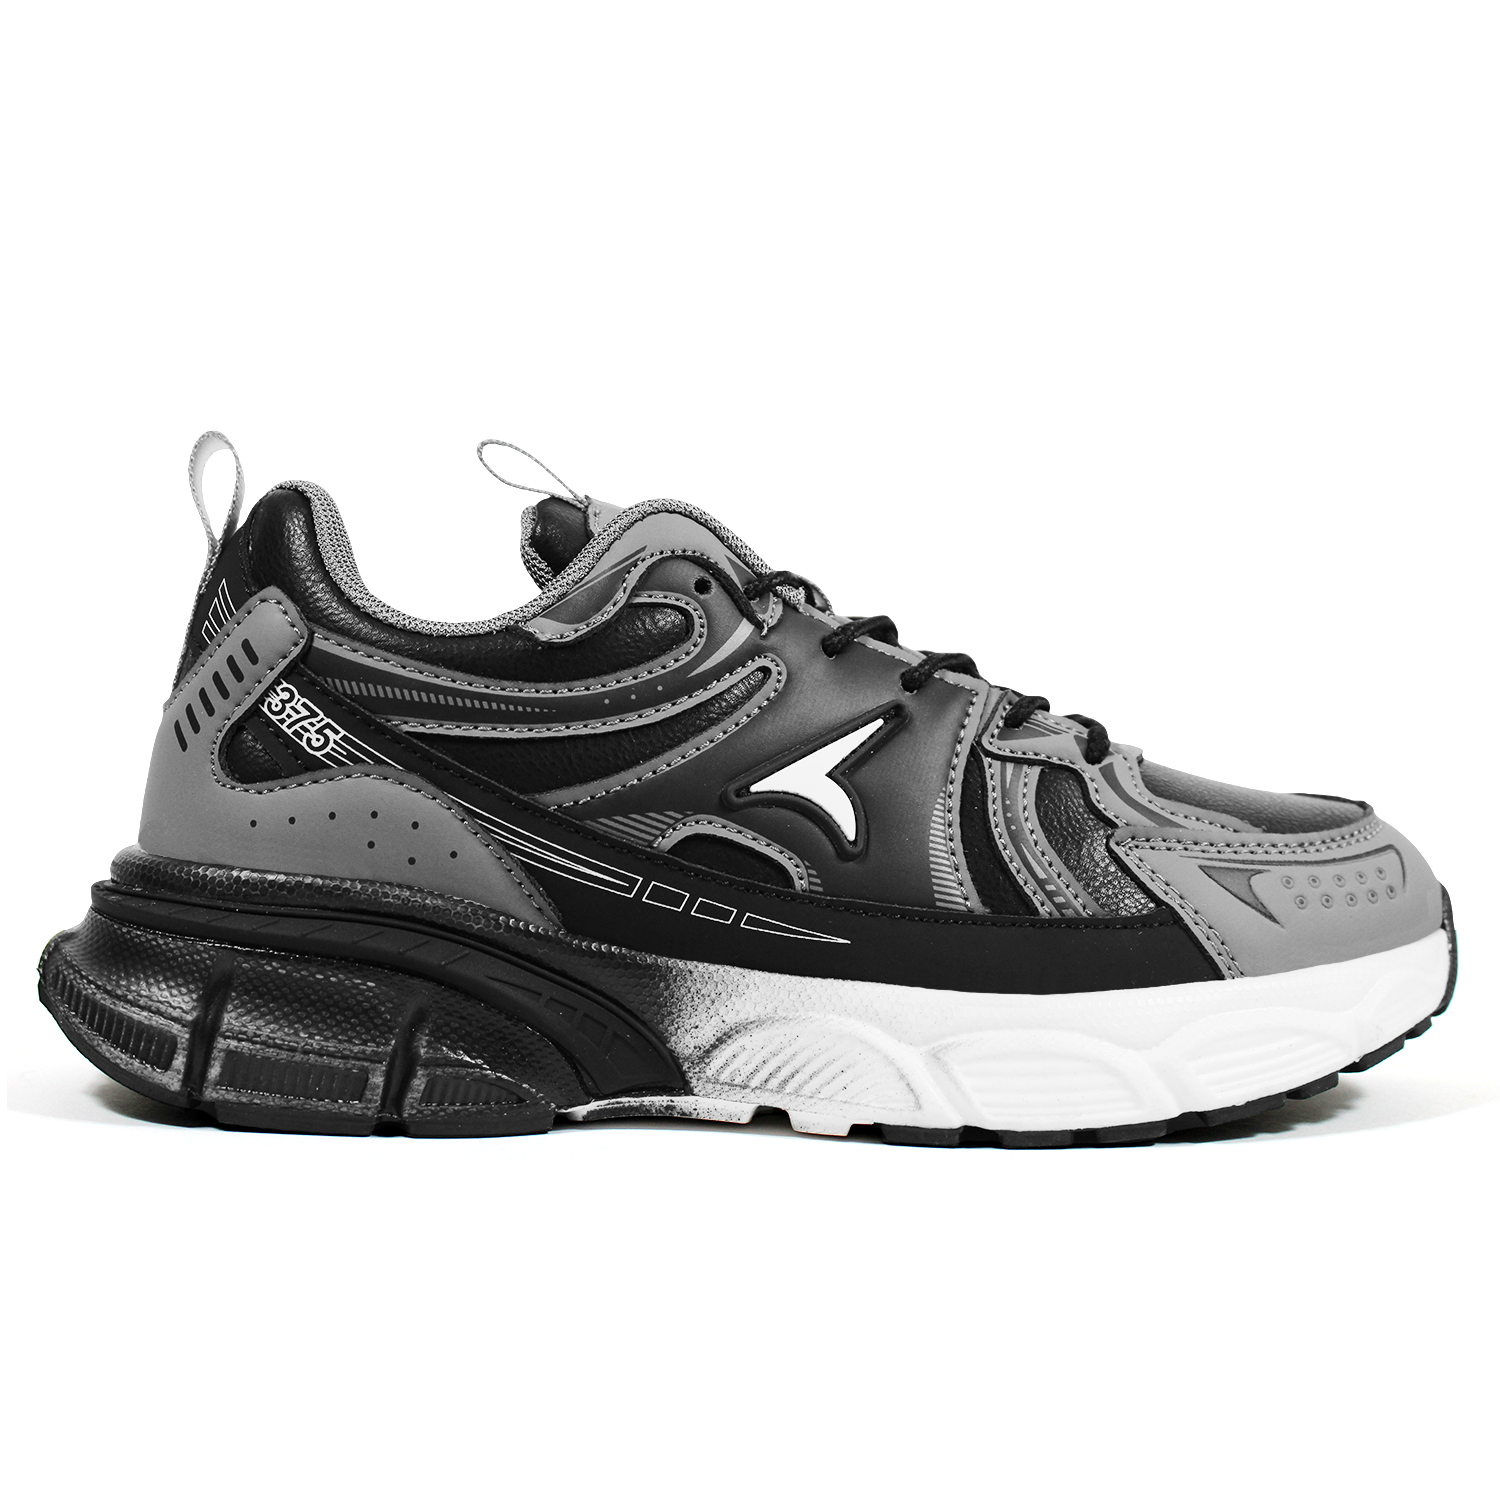 K- Footlance Mens Shoes | Sports Shoes | Running Shoes | Walking Shoes |  Training & Gym Shoes Outdoors For Men